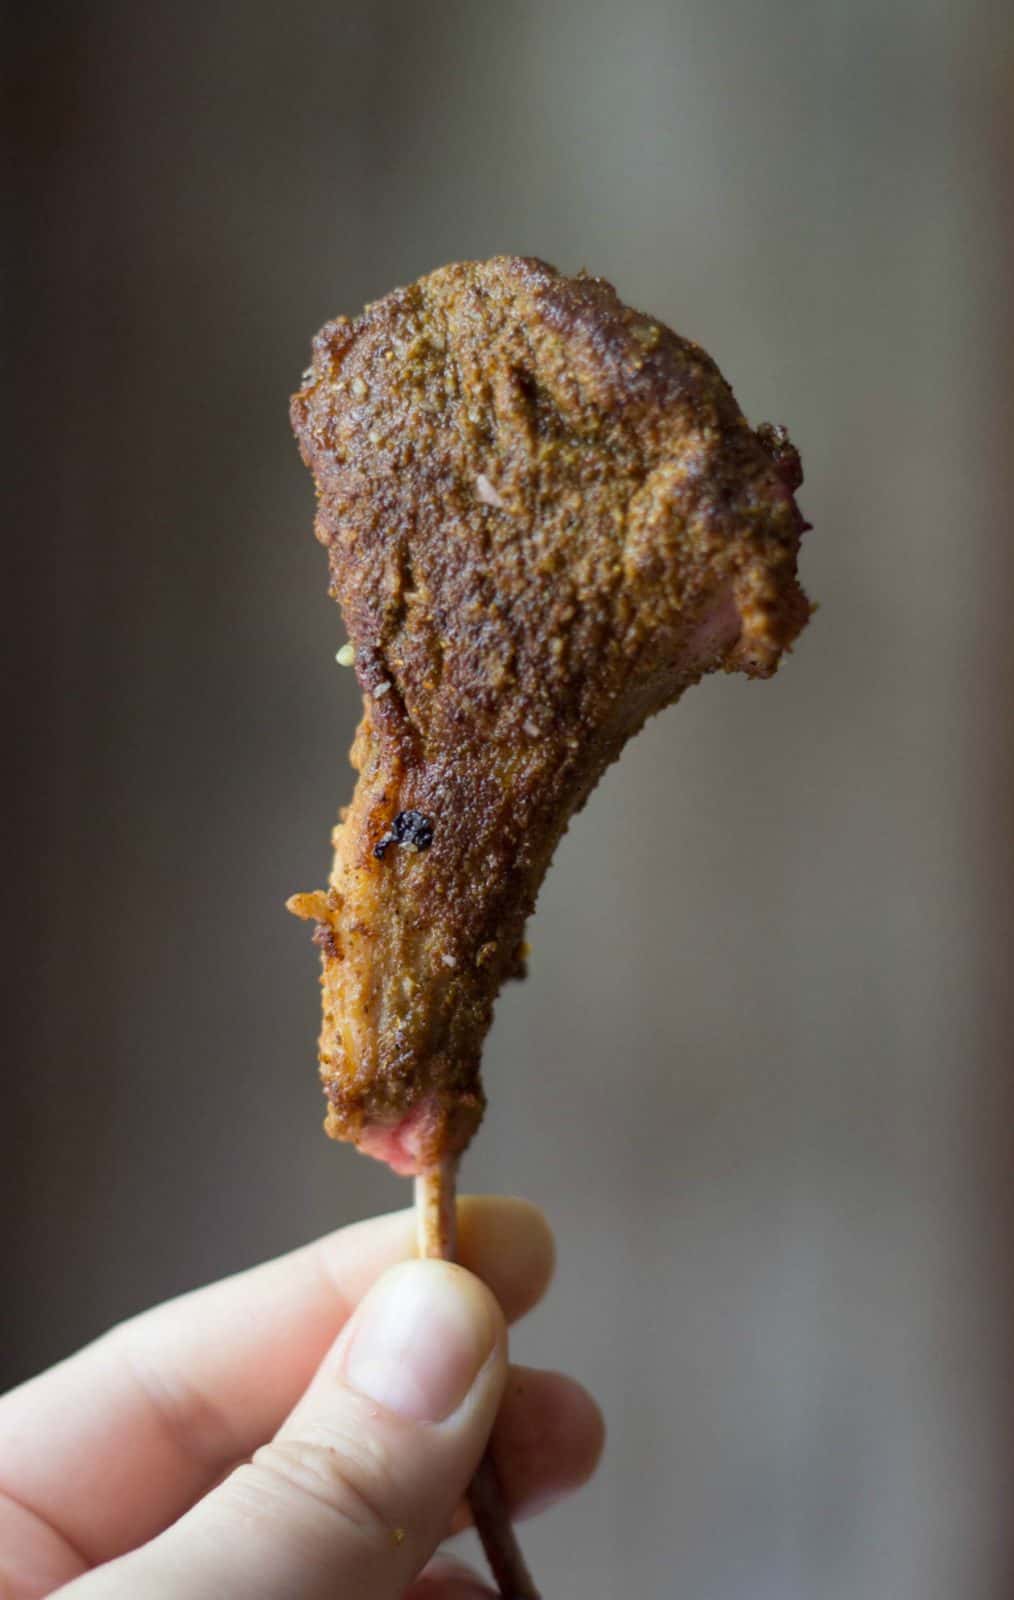 Finished close up of a Moroccan Lamb Lollipop.